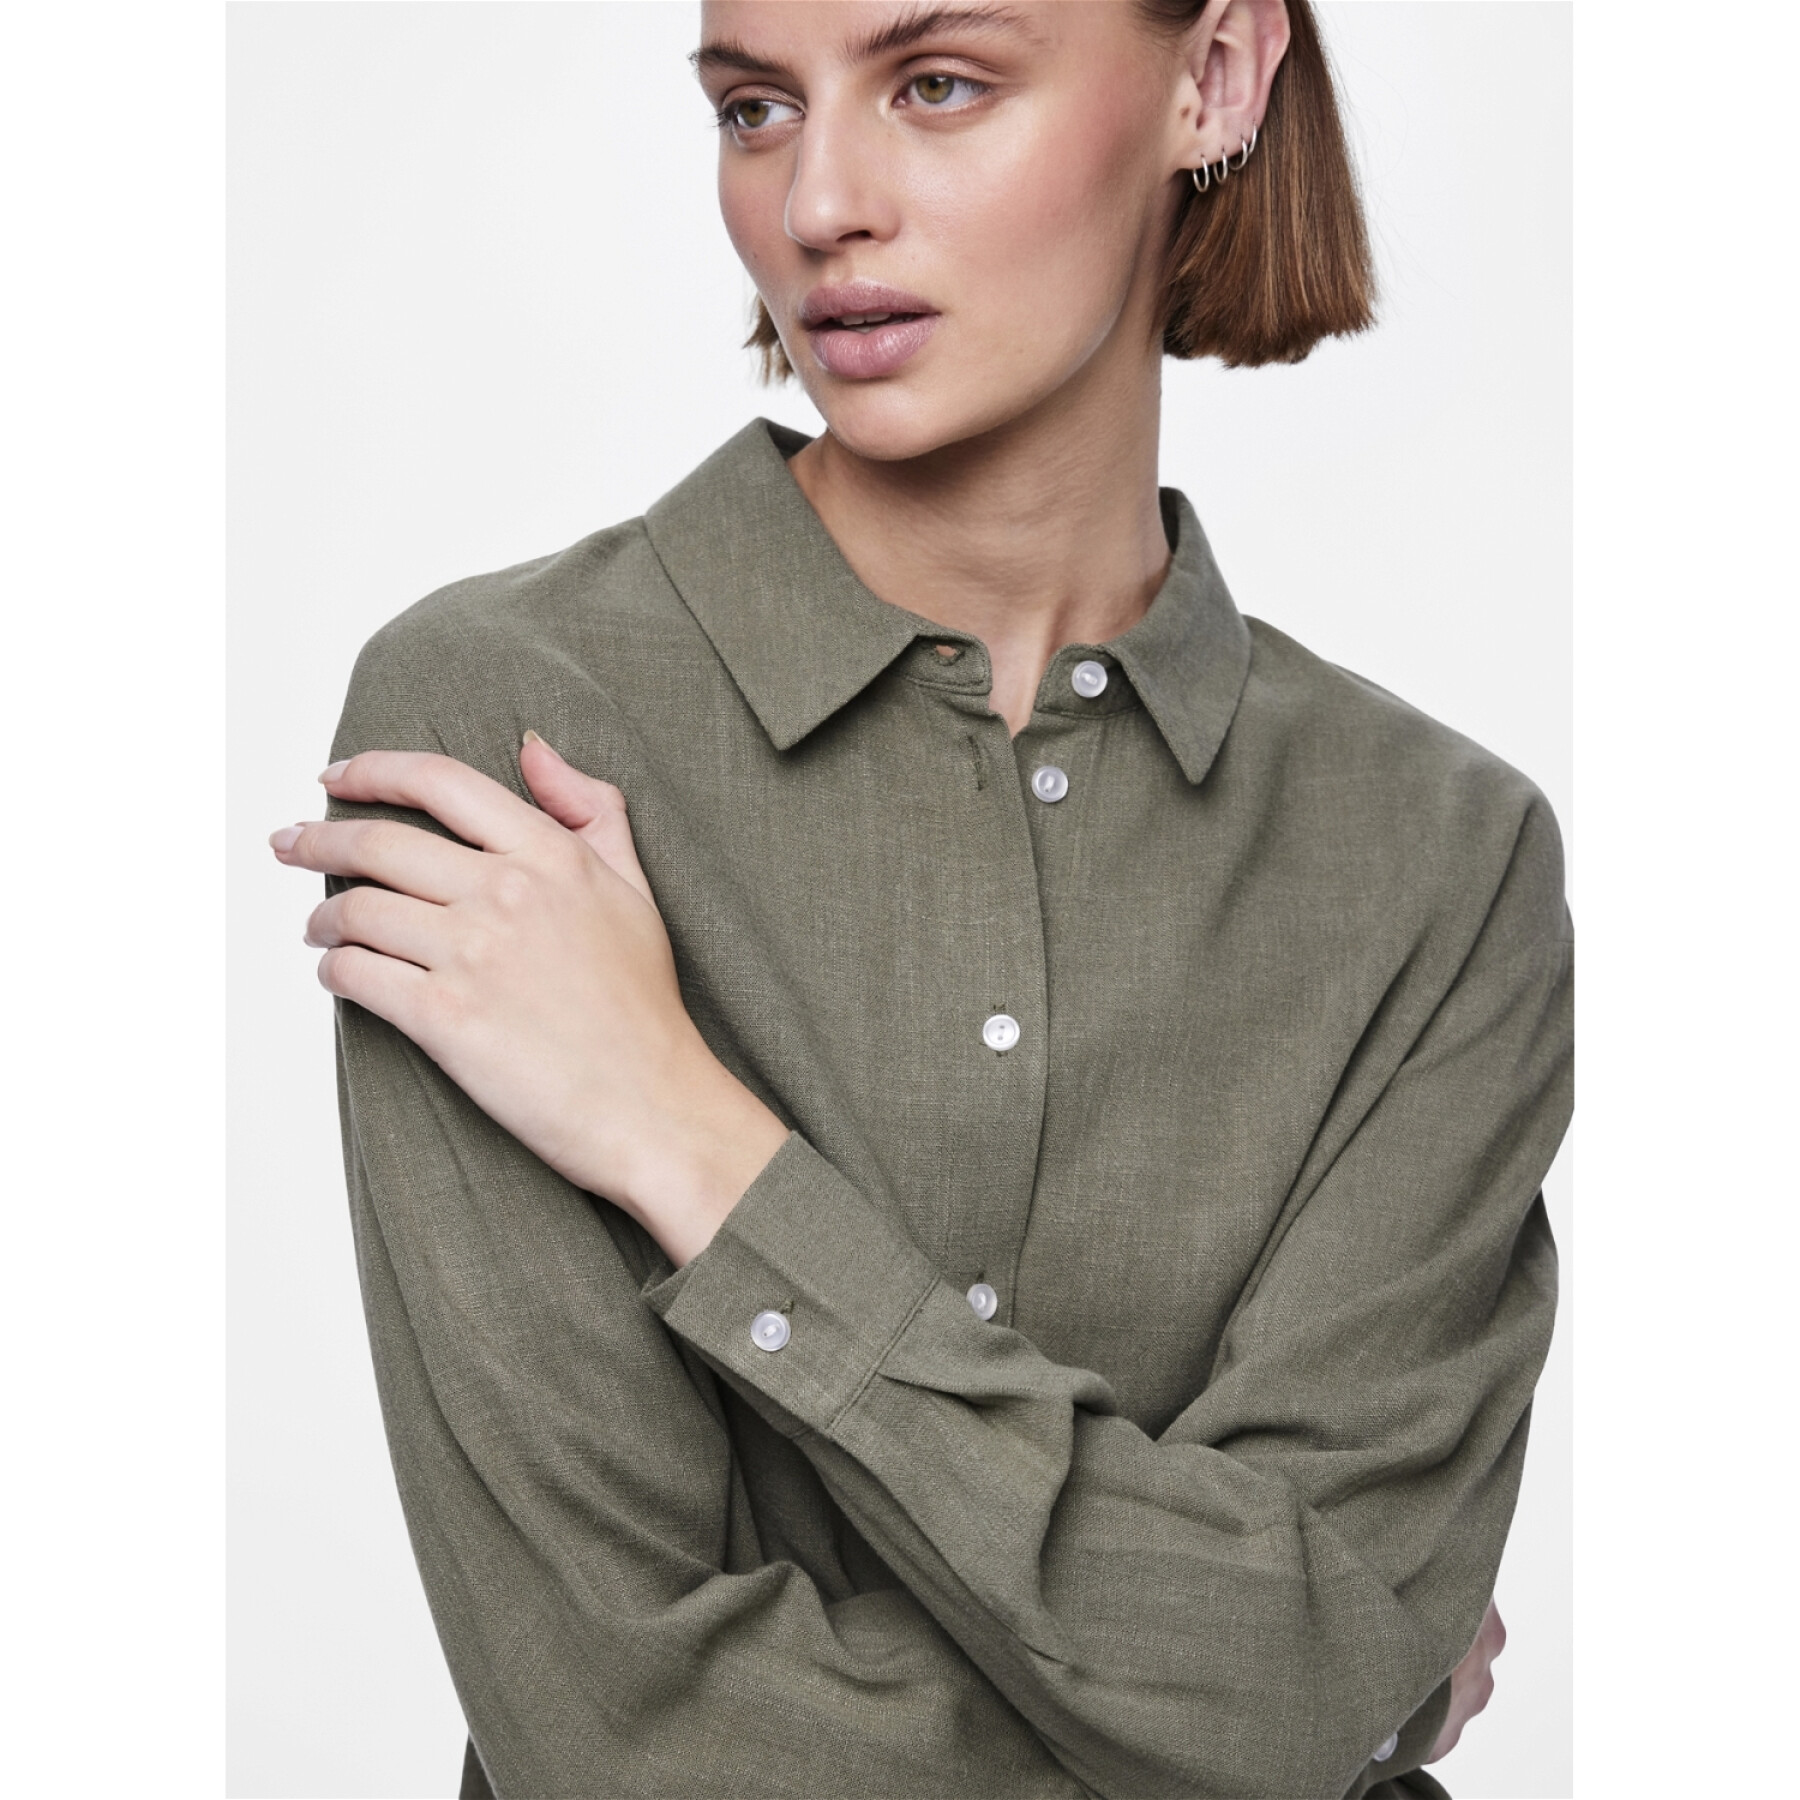 Women's long sleeve shirt Pieces Vinsty Noos BC